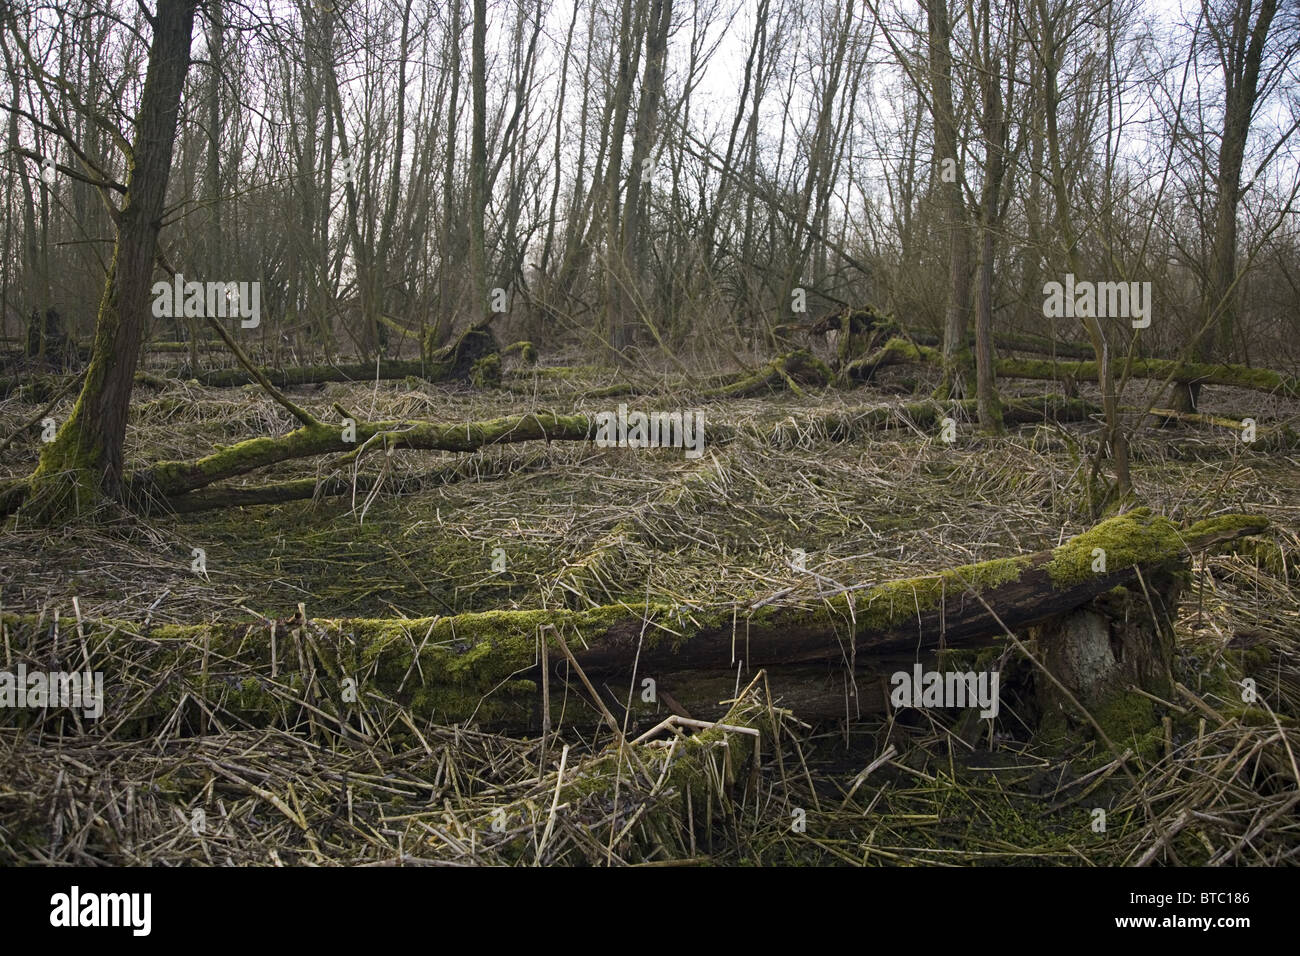 Neglected holm with many fallen willow trees covered with mosses and remains of dead plants, Biesbosch National Park, Netherland Stock Photo